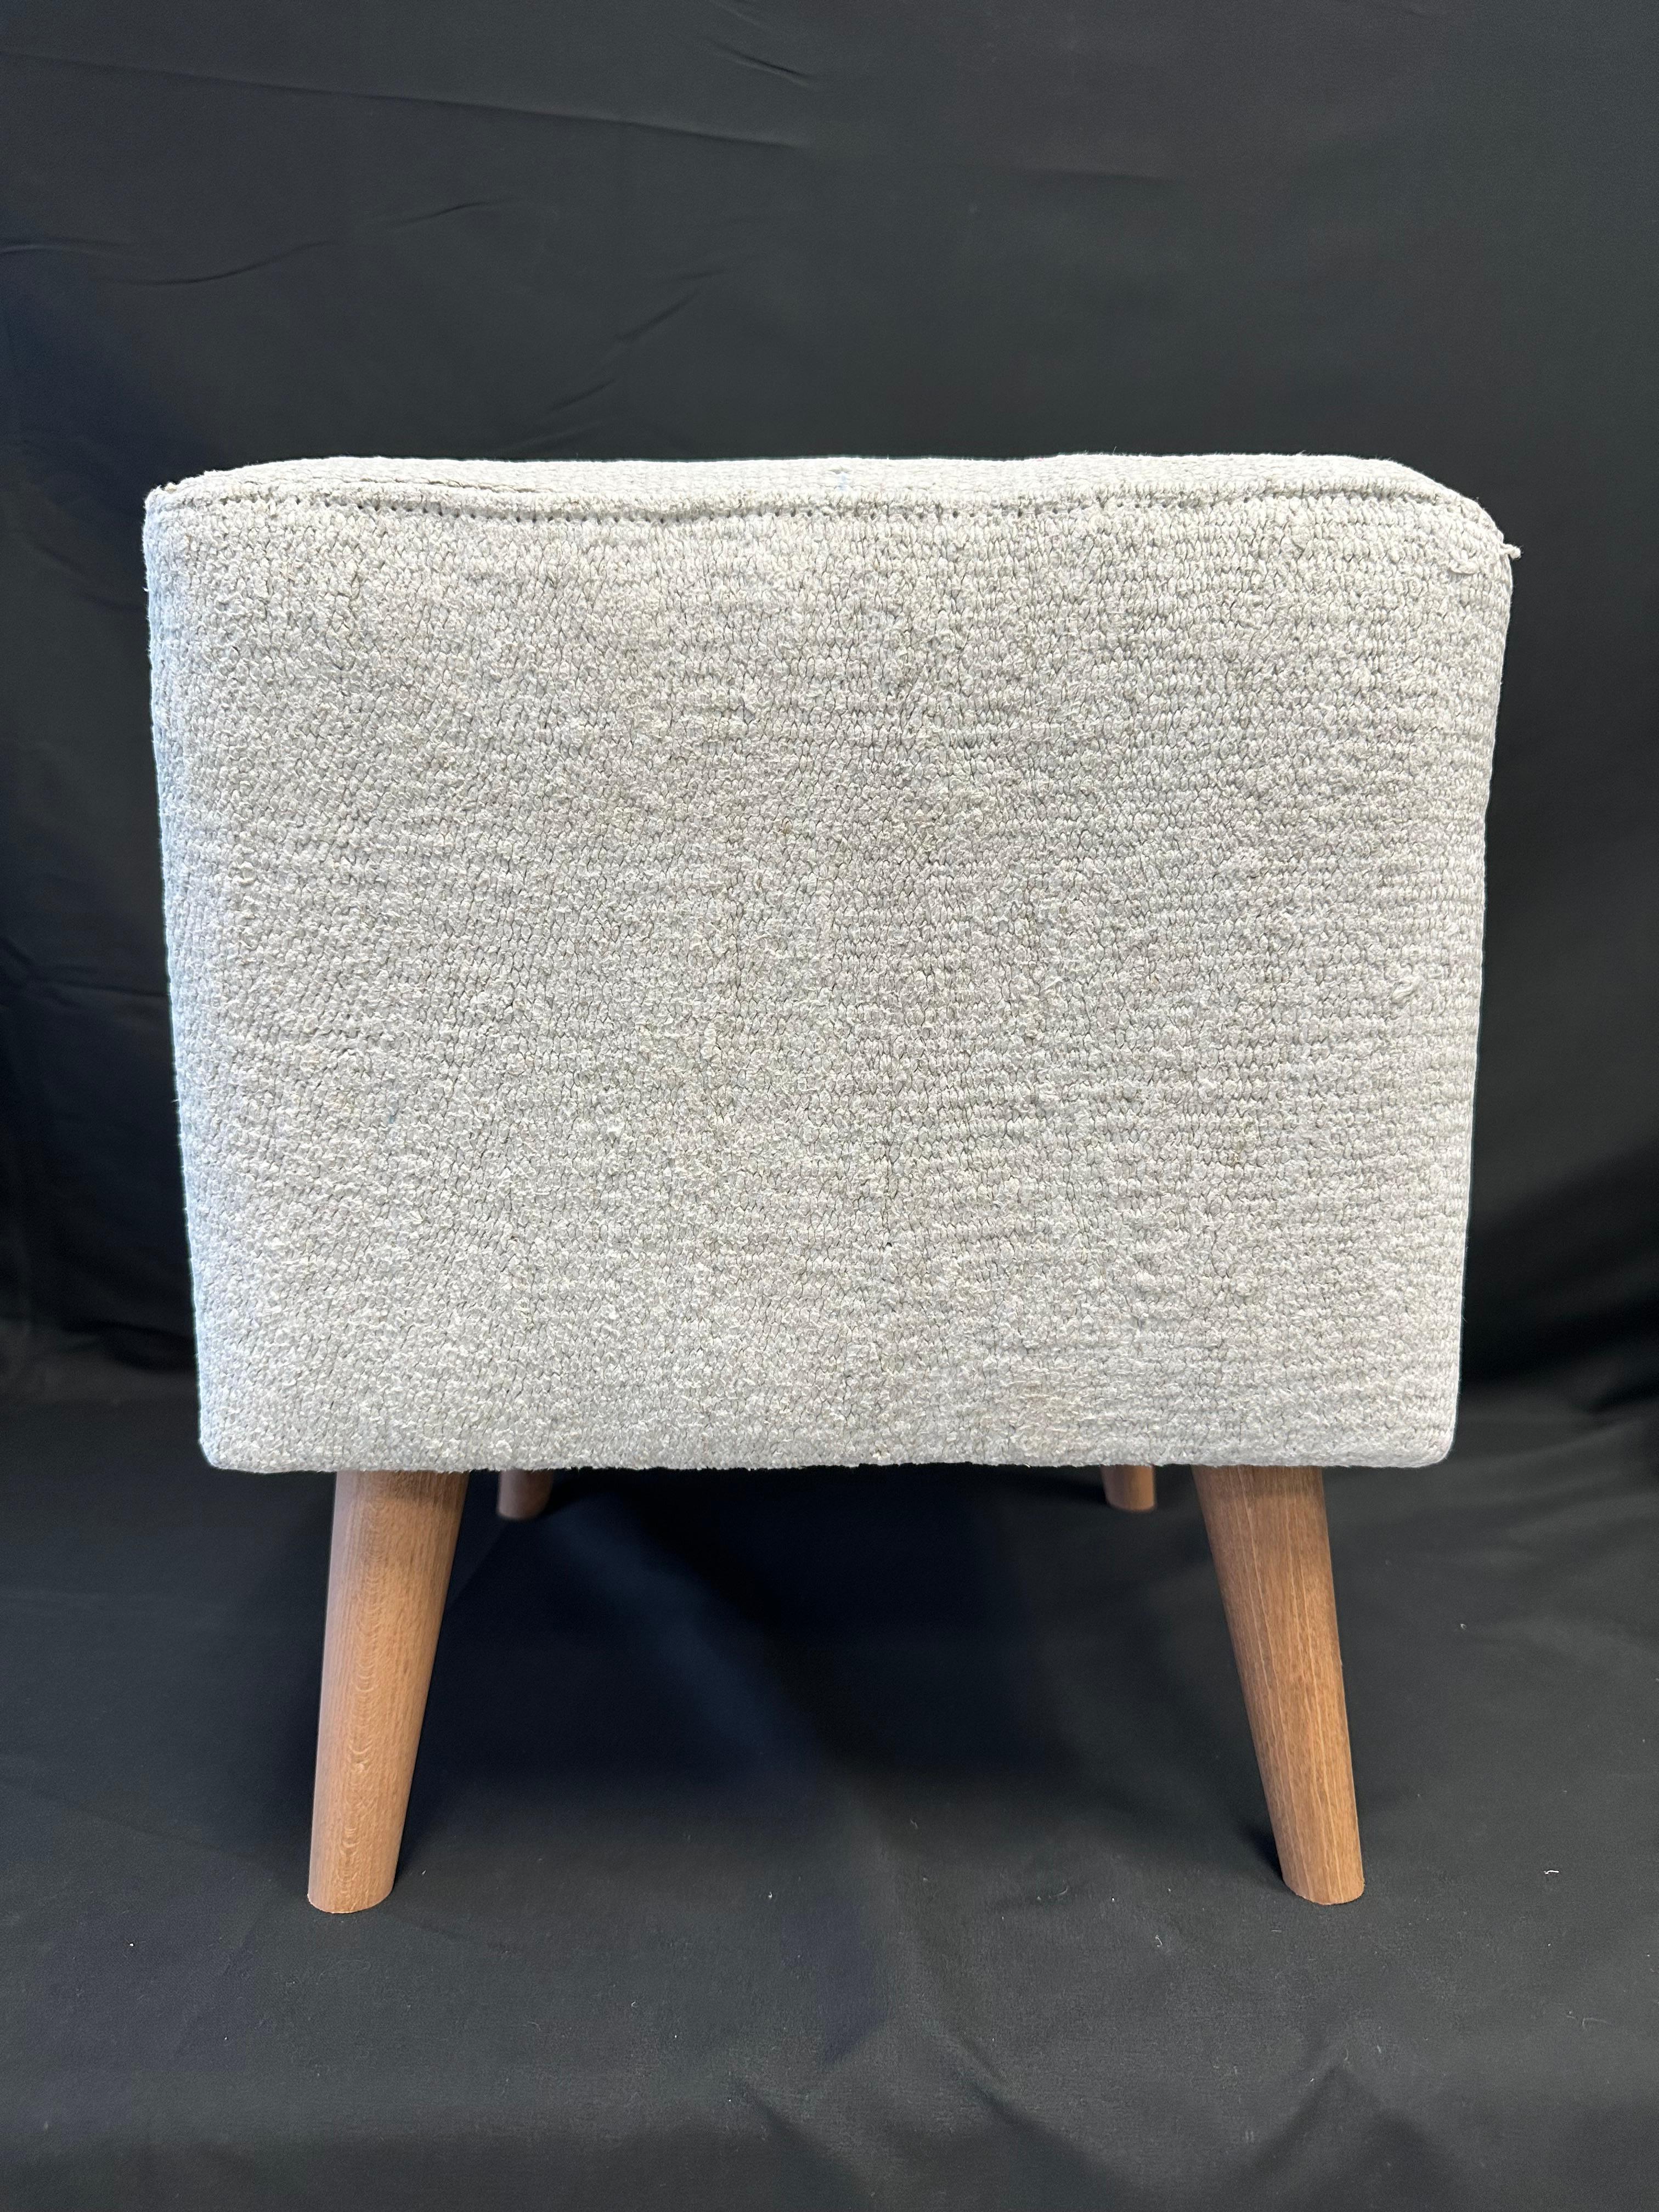 Our vintage hemp poufs are versatile pieces, designed to complement any room in your home, serving as both a comfortable footstool and extra seating. This pouf is not only stylish but also eco-friendly. The hemp fabric covering is durable and also a